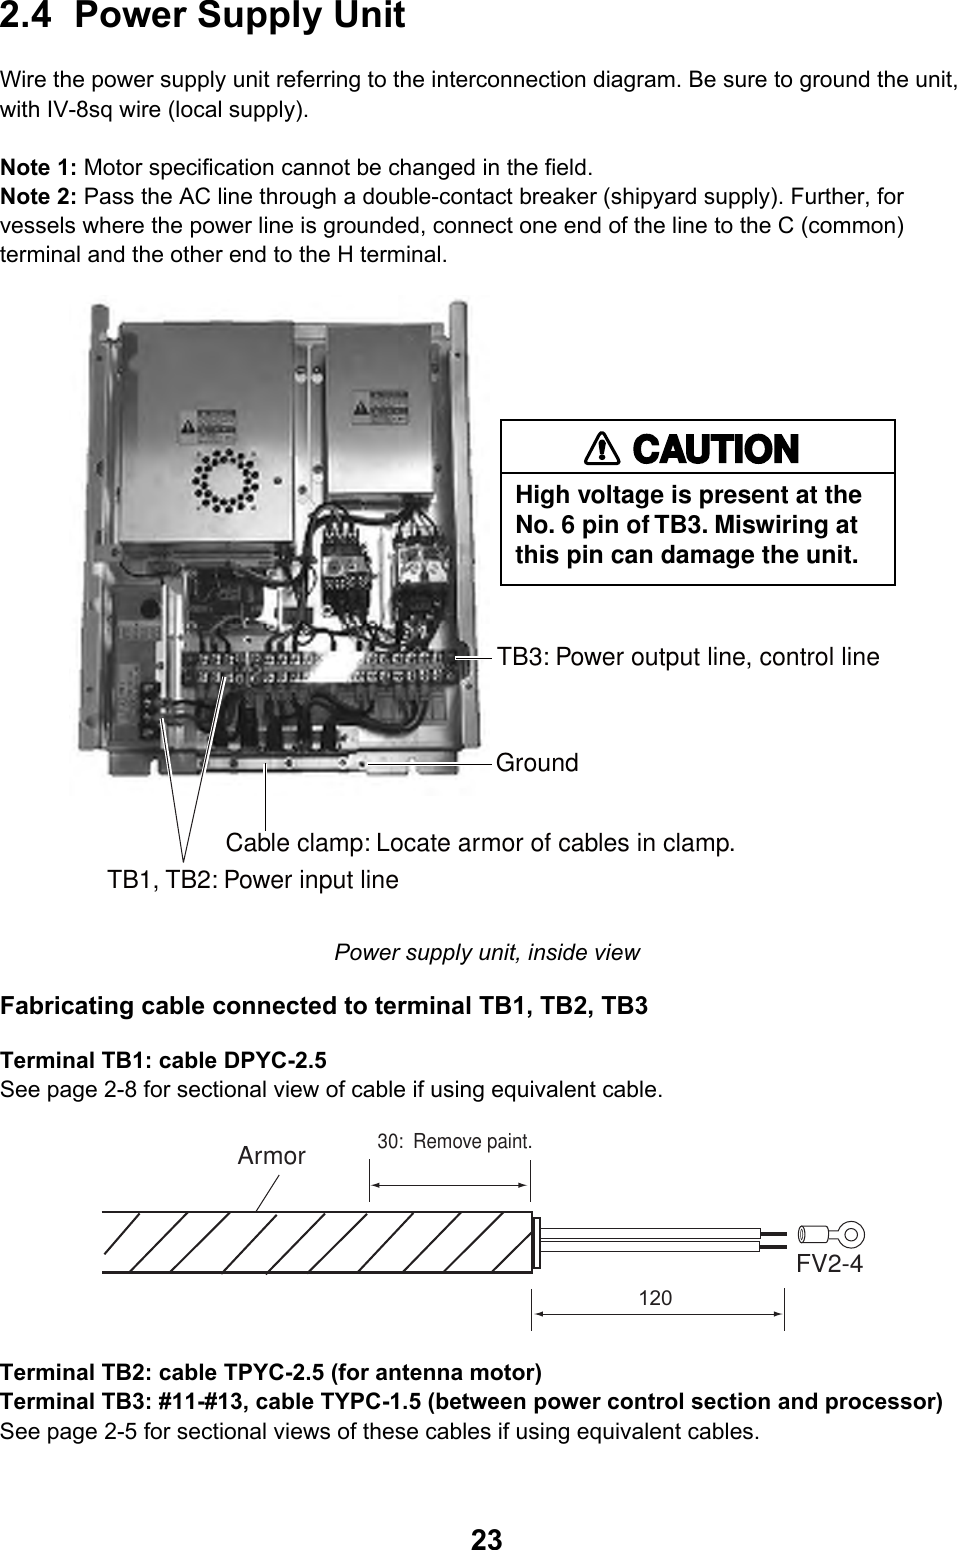  232.4 Power Supply Unit  Wire the power supply unit referring to the interconnection diagram. Be sure to ground the unit, with IV-8sq wire (local supply).  Note 1: Motor specification cannot be changed in the field. Note 2: Pass the AC line through a double-contact breaker (shipyard supply). Further, for vessels where the power line is grounded, connect one end of the line to the C (common) terminal and the other end to the H terminal. TB3: Power output line, control lineCable clamp: Locate armor of cables in clamp.TB1, TB2: Power input lineGround High voltage is present at theNo. 6 pin of TB3. Miswiring atthis pin can damage the unit.CAUTION Power supply unit, inside view Fabricating cable connected to terminal TB1, TB2, TB3 Terminal TB1: cable DPYC-2.5 See page 2-8 for sectional view of cable if using equivalent cable. 30:  Remove paint.Armor120FV2-4 Terminal TB2: cable TPYC-2.5 (for antenna motor) Terminal TB3: #11-#13, cable TYPC-1.5 (between power control section and processor) See page 2-5 for sectional views of these cables if using equivalent cables. 